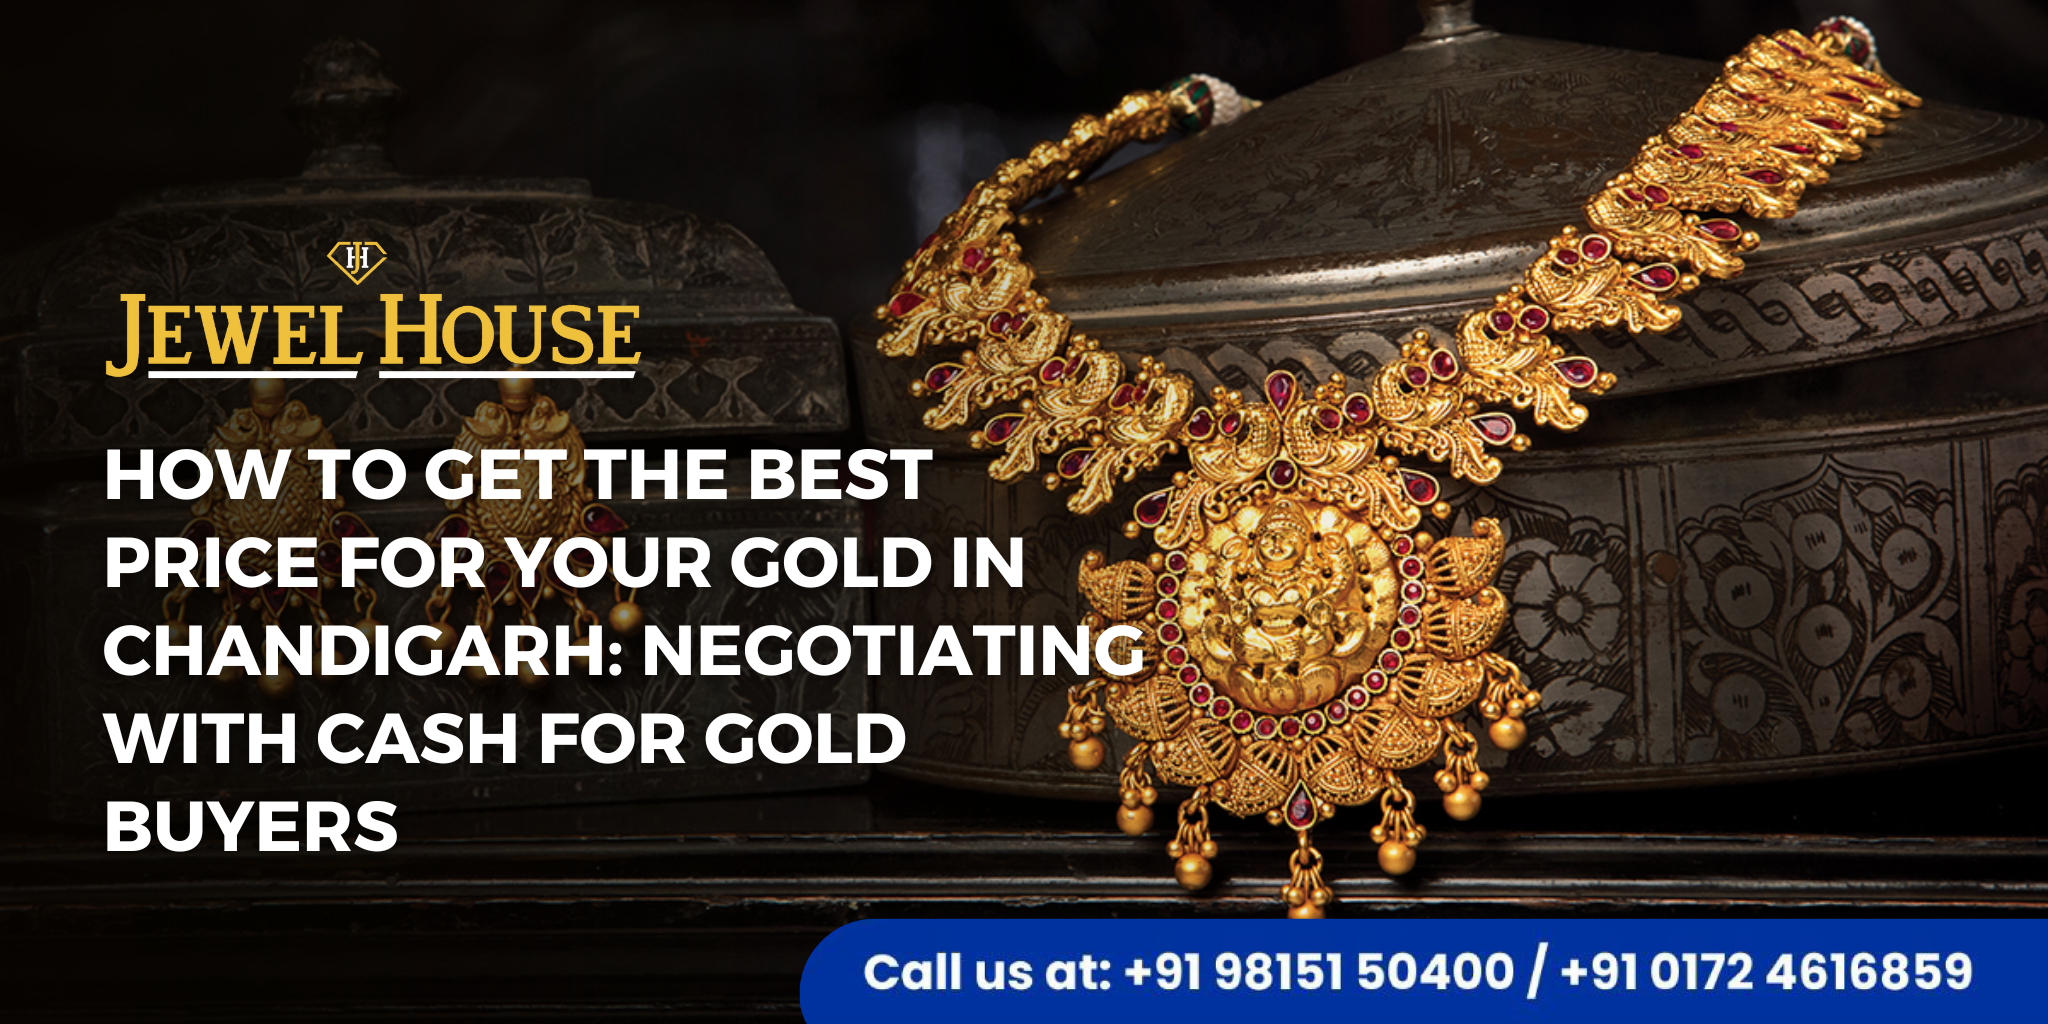 Get the Best Price for Your Gold in Chandigarh